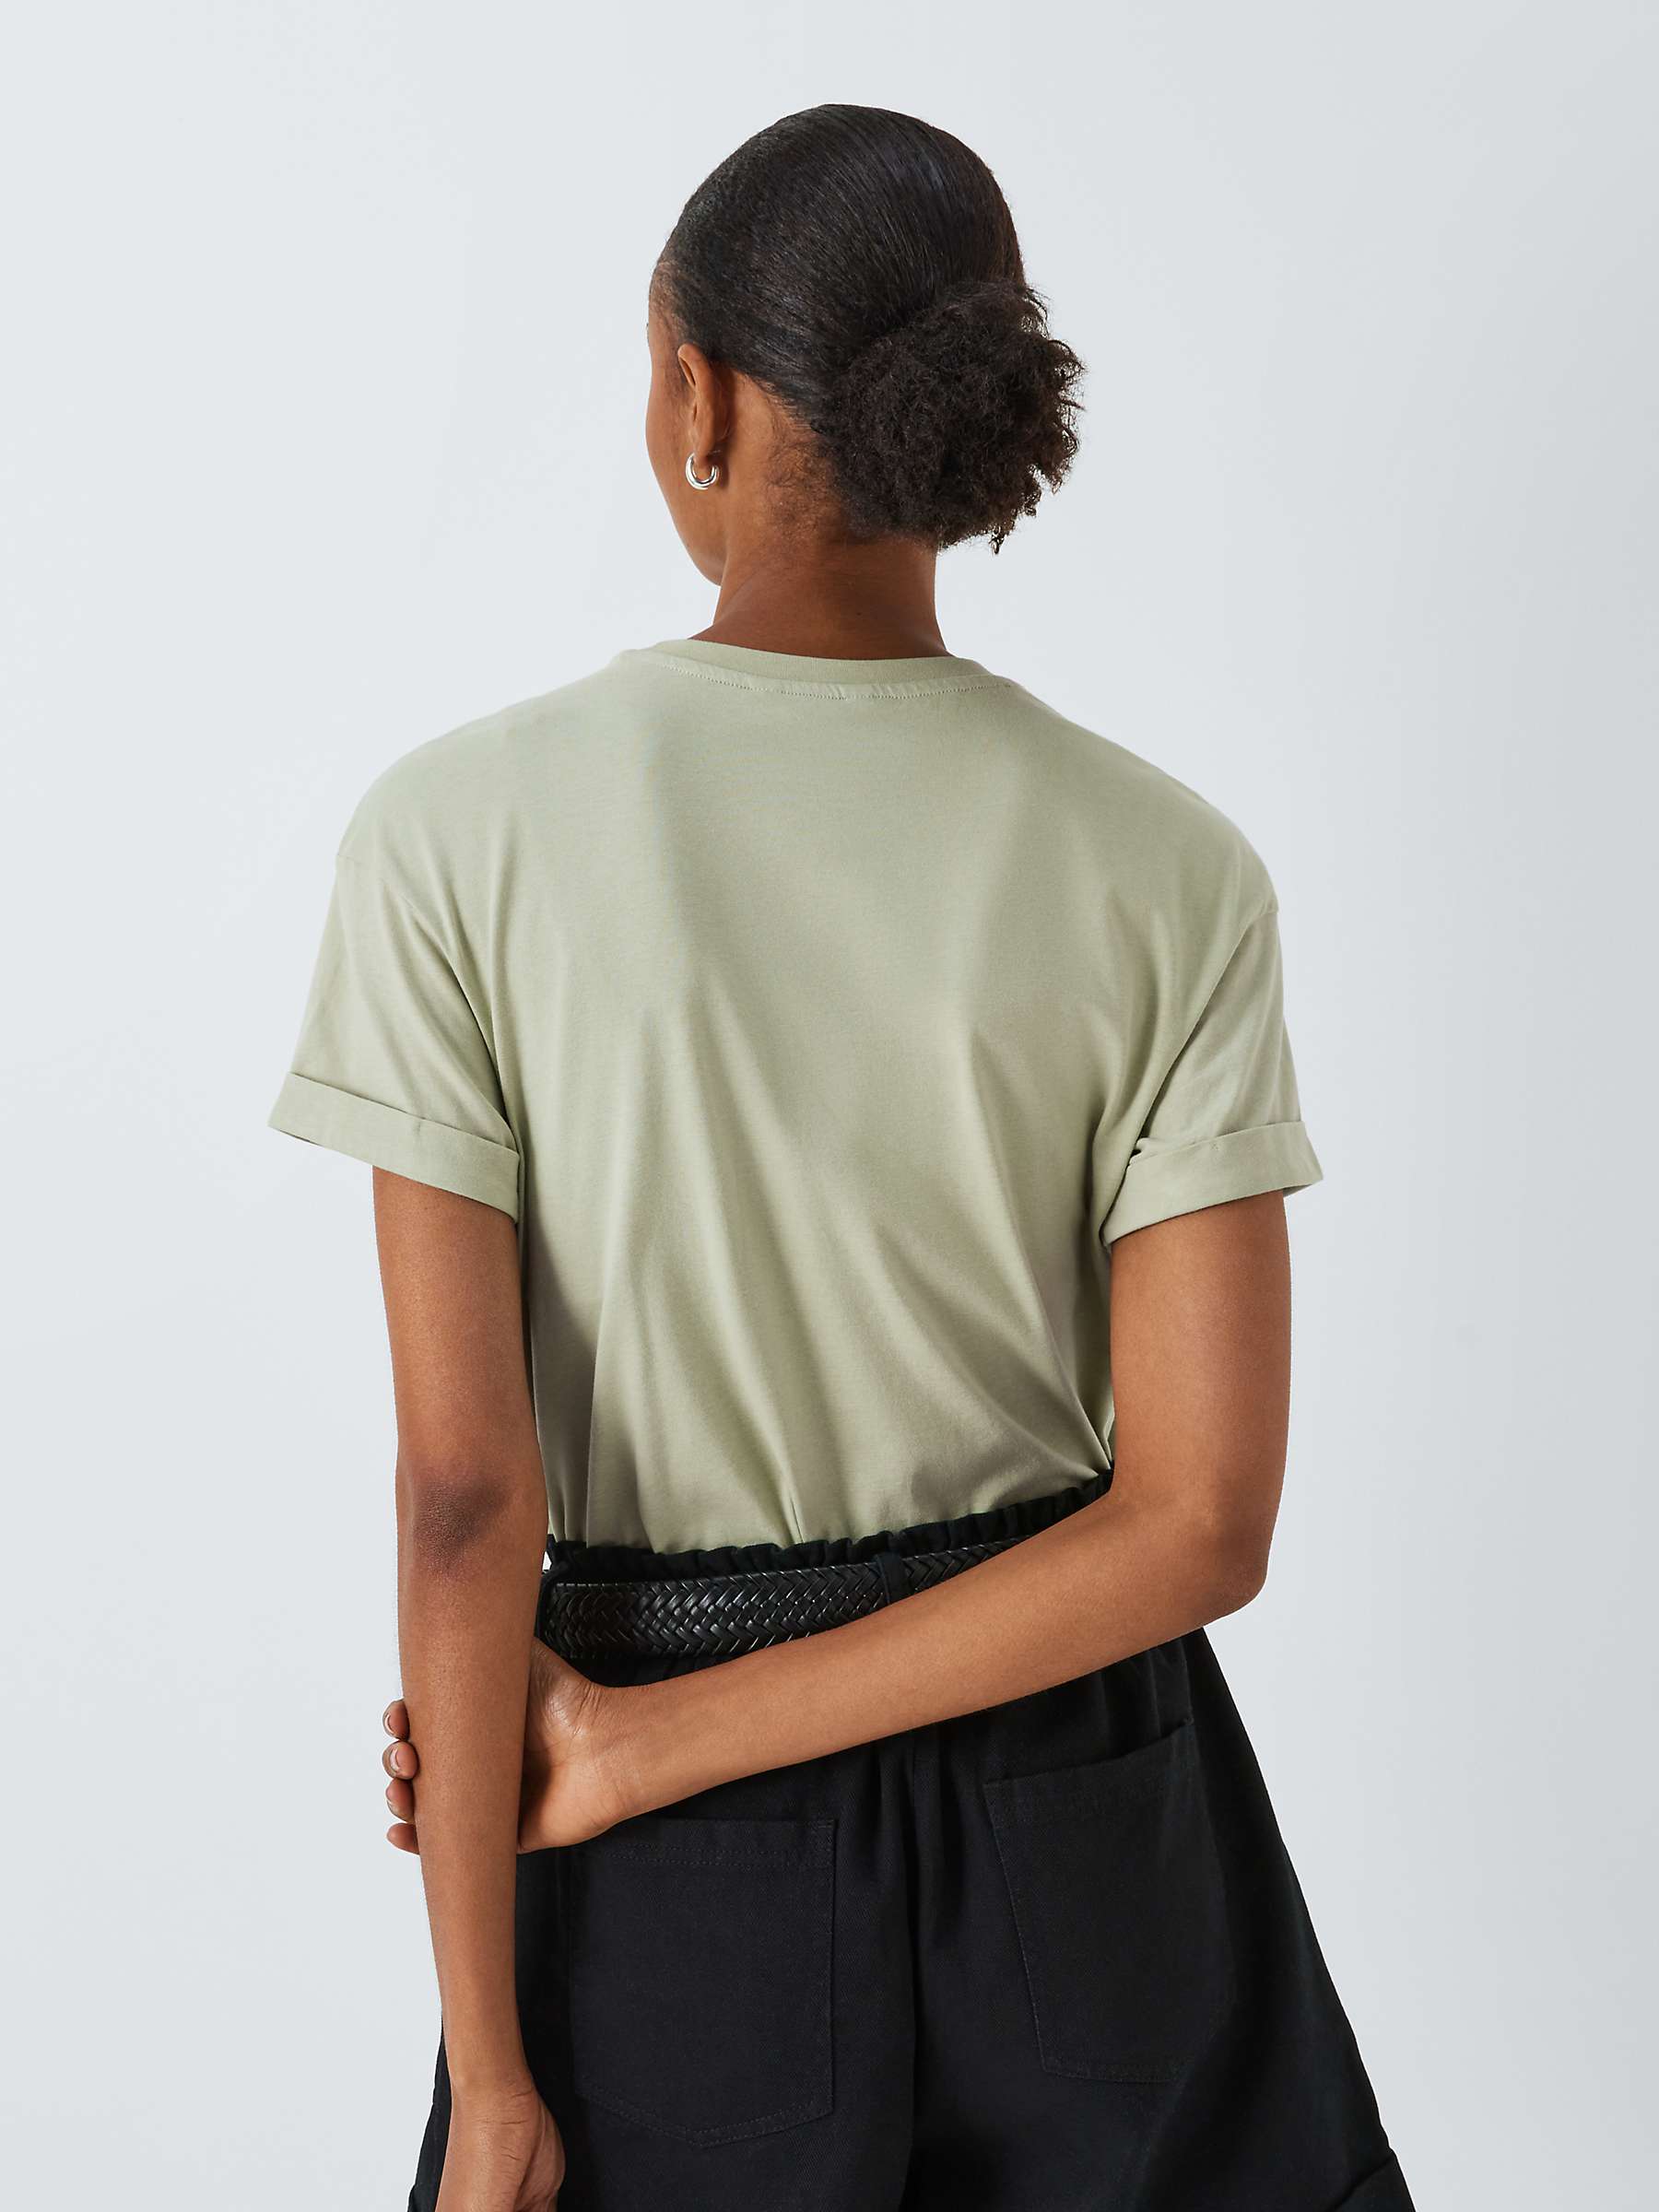 Buy John Lewis ANYDAY Relax Pocket Tee Online at johnlewis.com